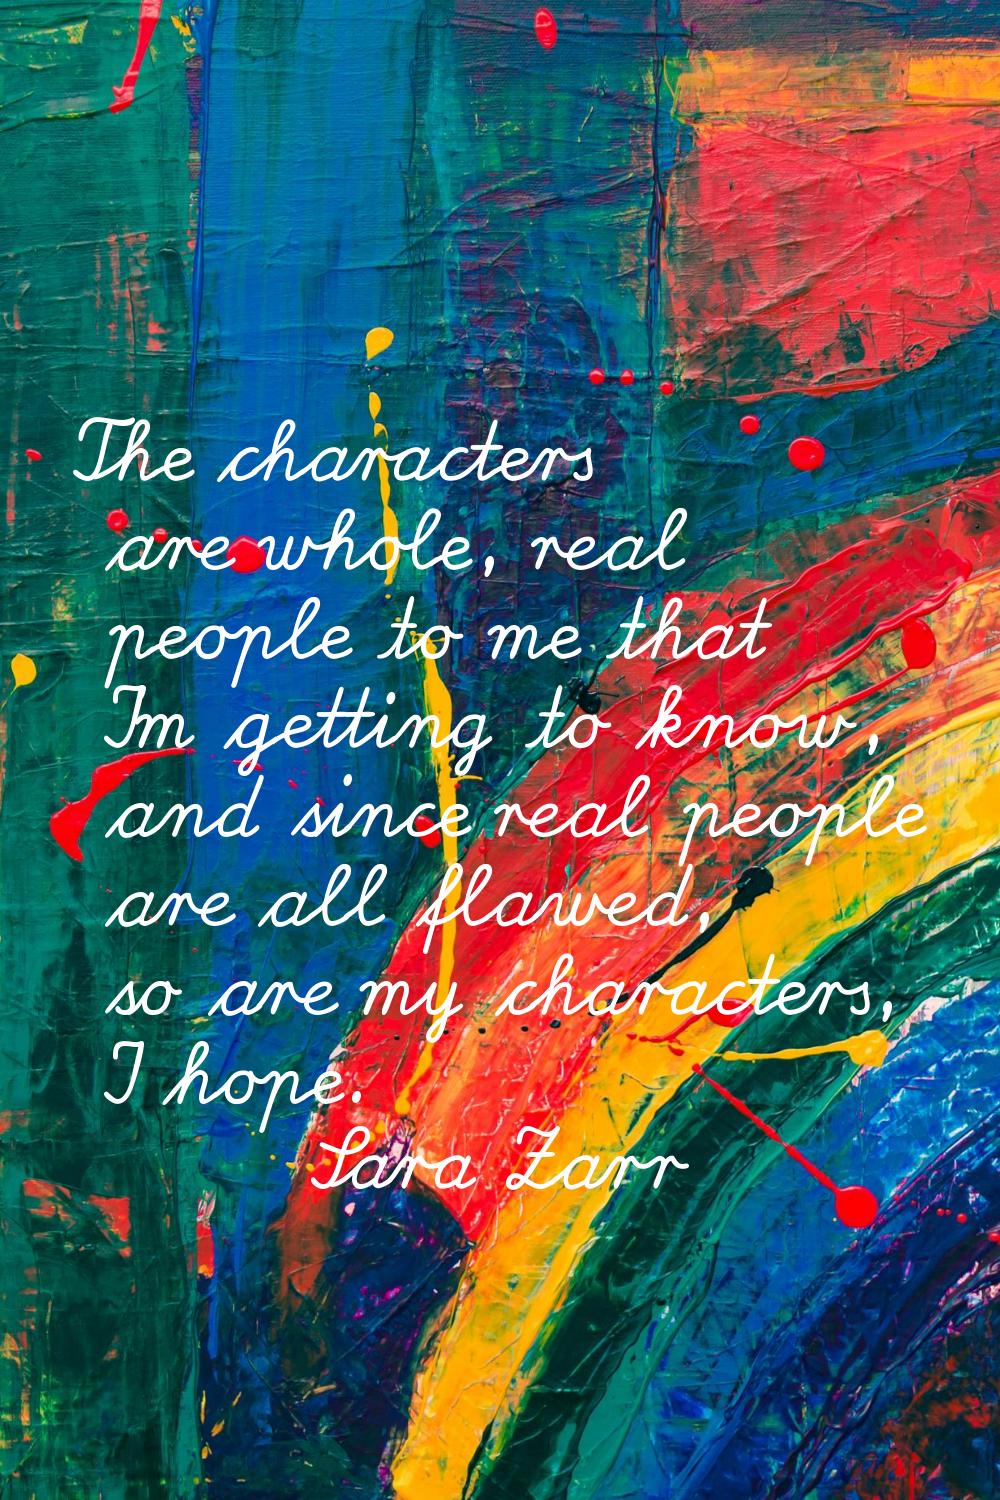 The characters are whole, real people to me that I'm getting to know, and since real people are all